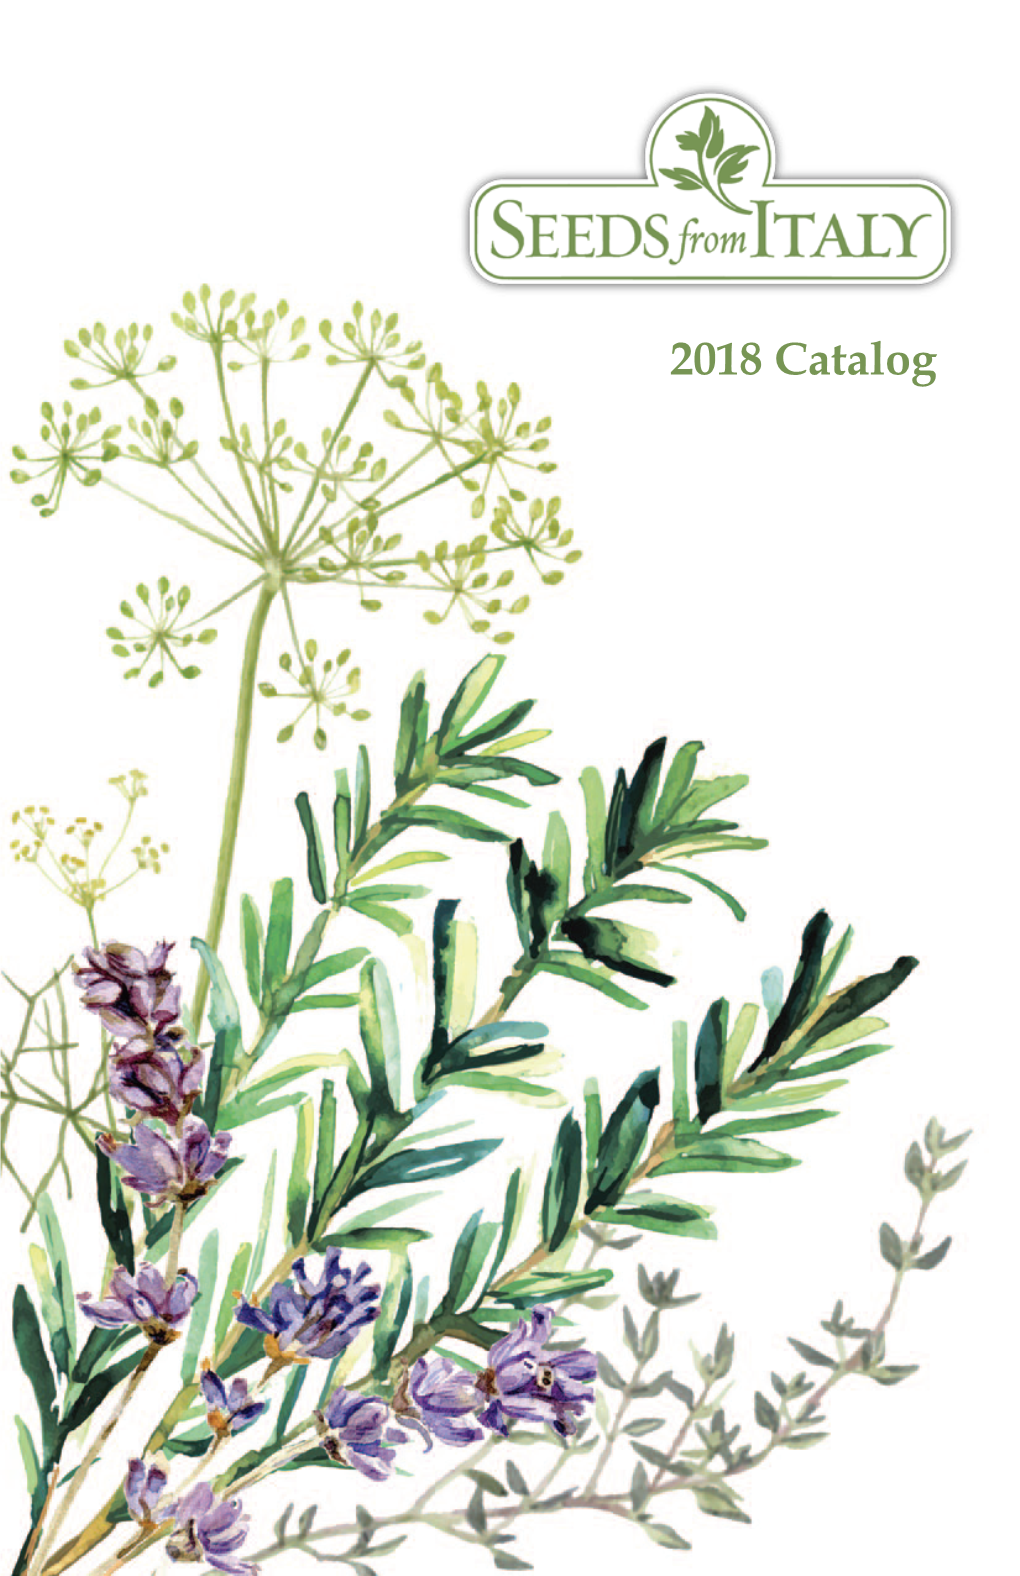 2018 Catalog Bringing You the Best Italian Seeds on the Planet Dear Italian Food Lovers, We Are Happy to Present Our 2018 Catalog for Your Garden Planning